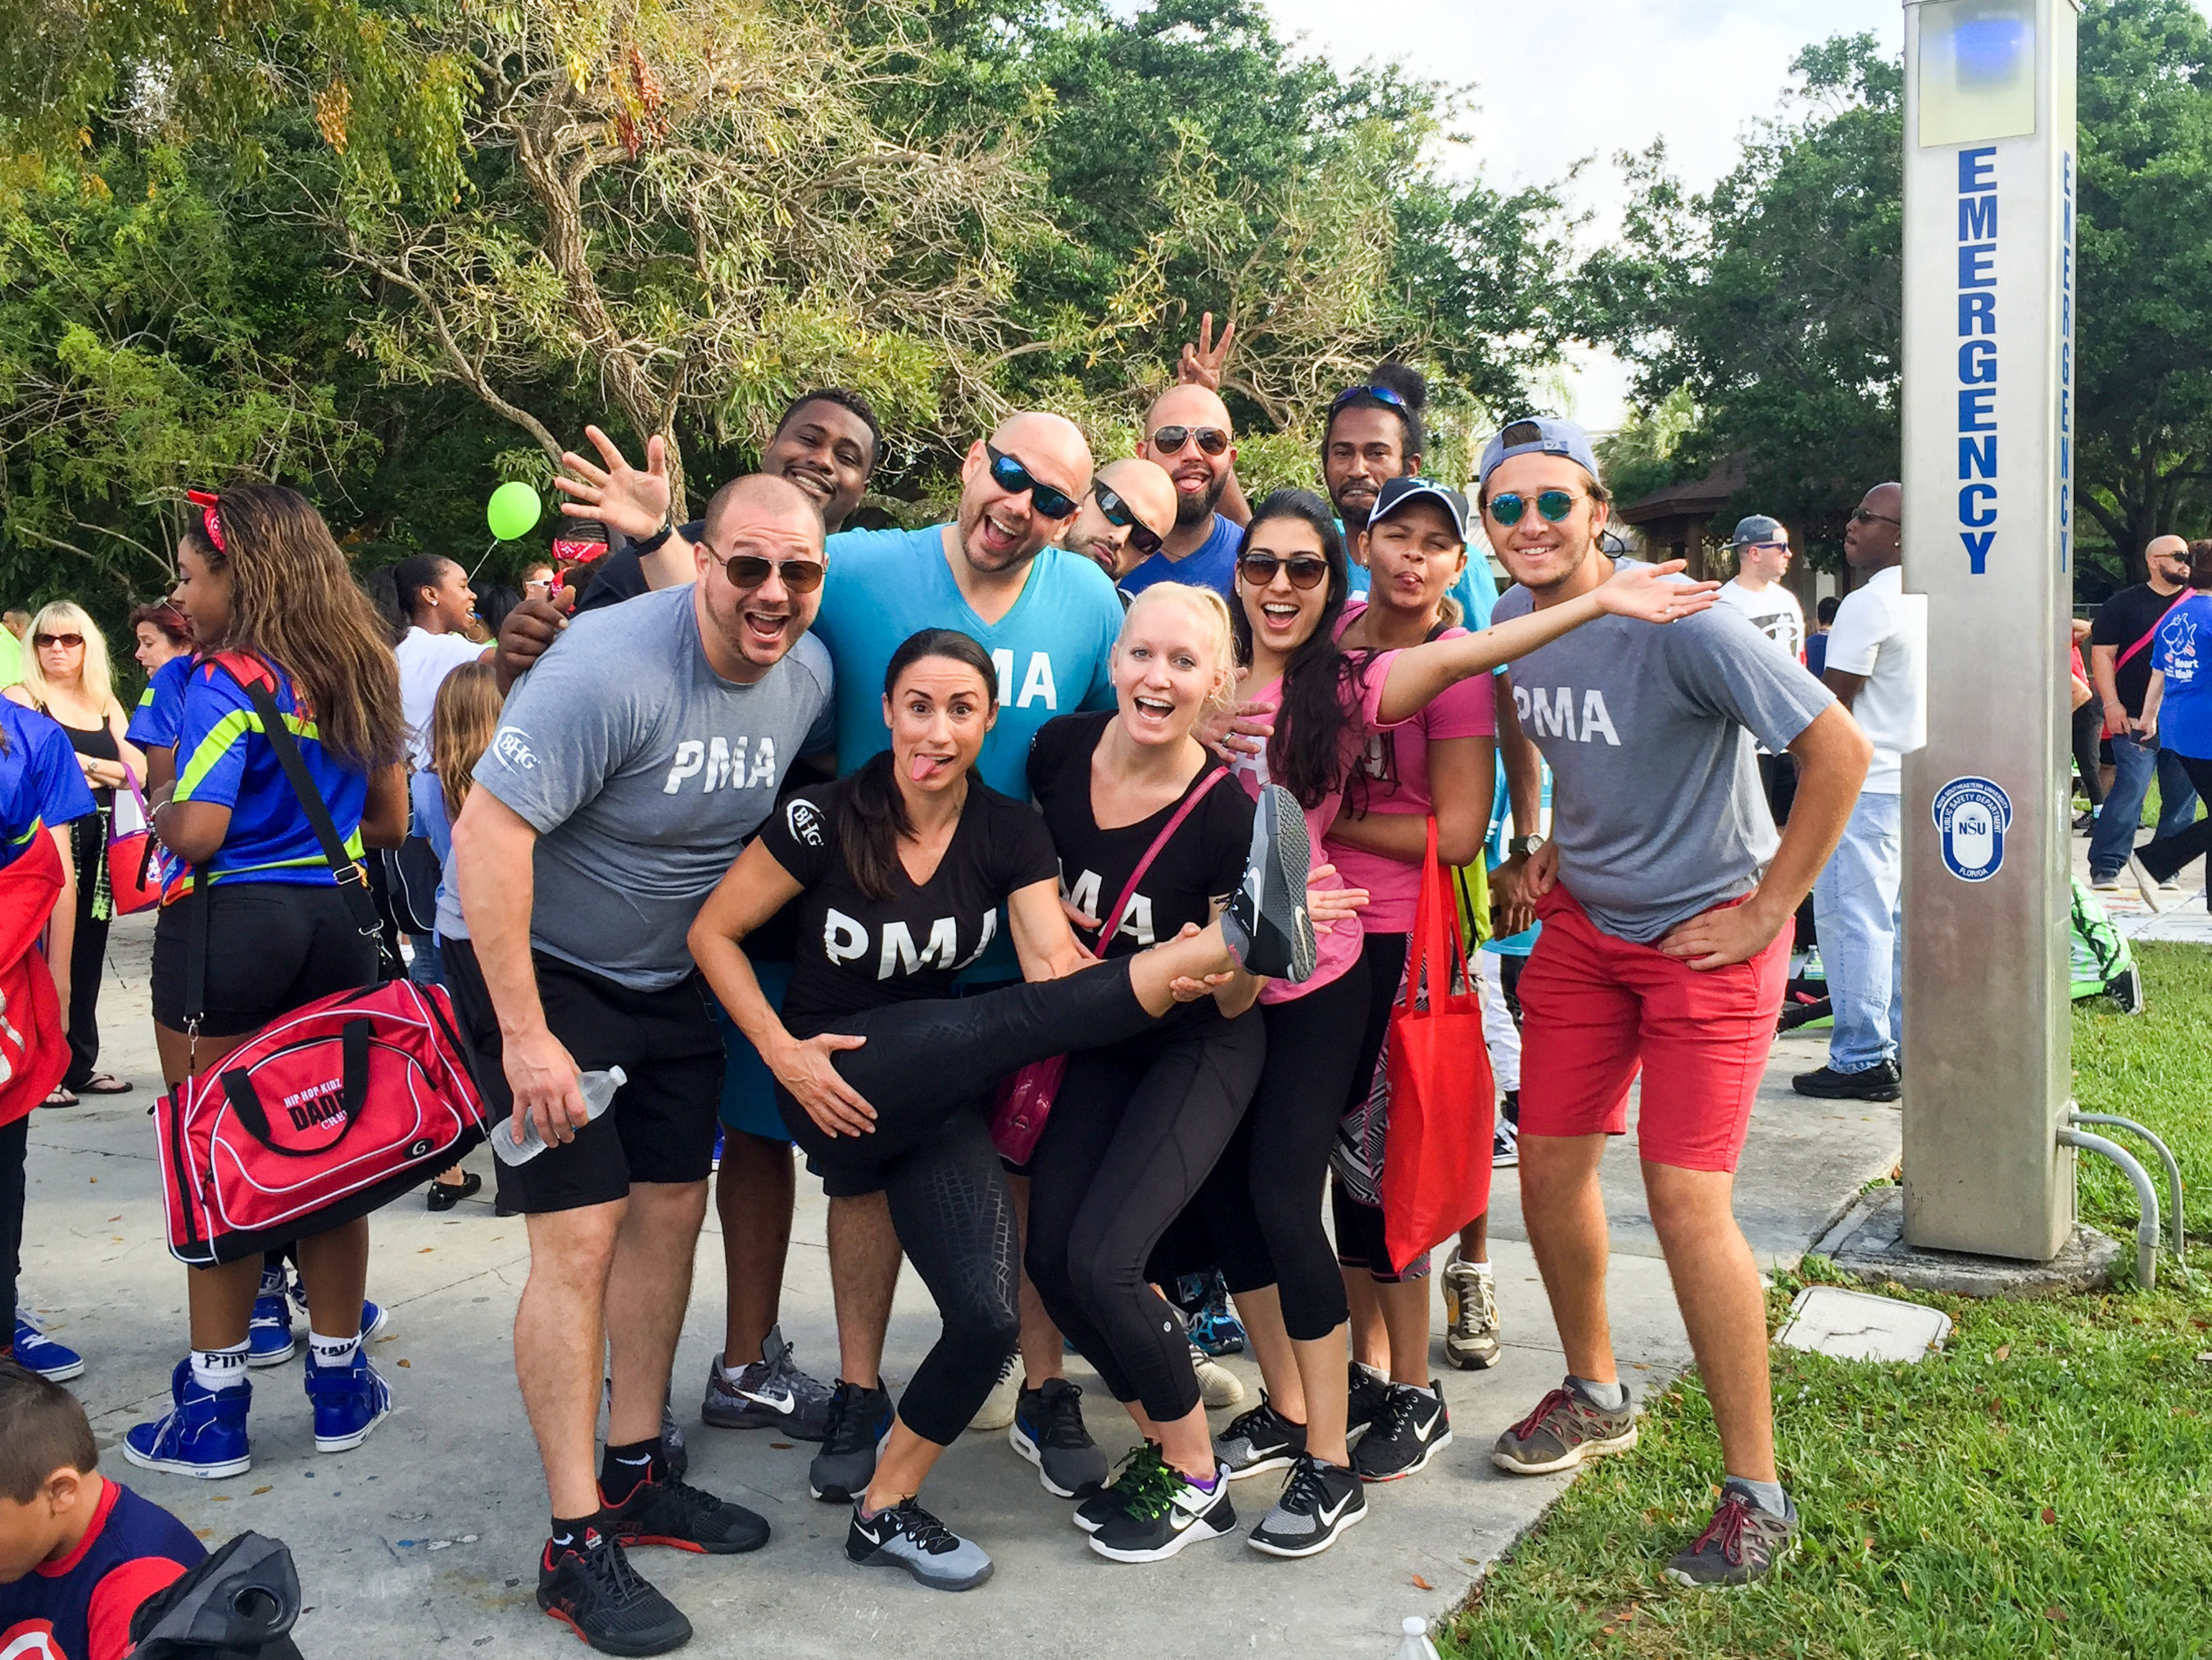 BHG employees participated in the Broward Heart Walk on Saturday, April 23 and raised $3,805 to support the American Heart Association.